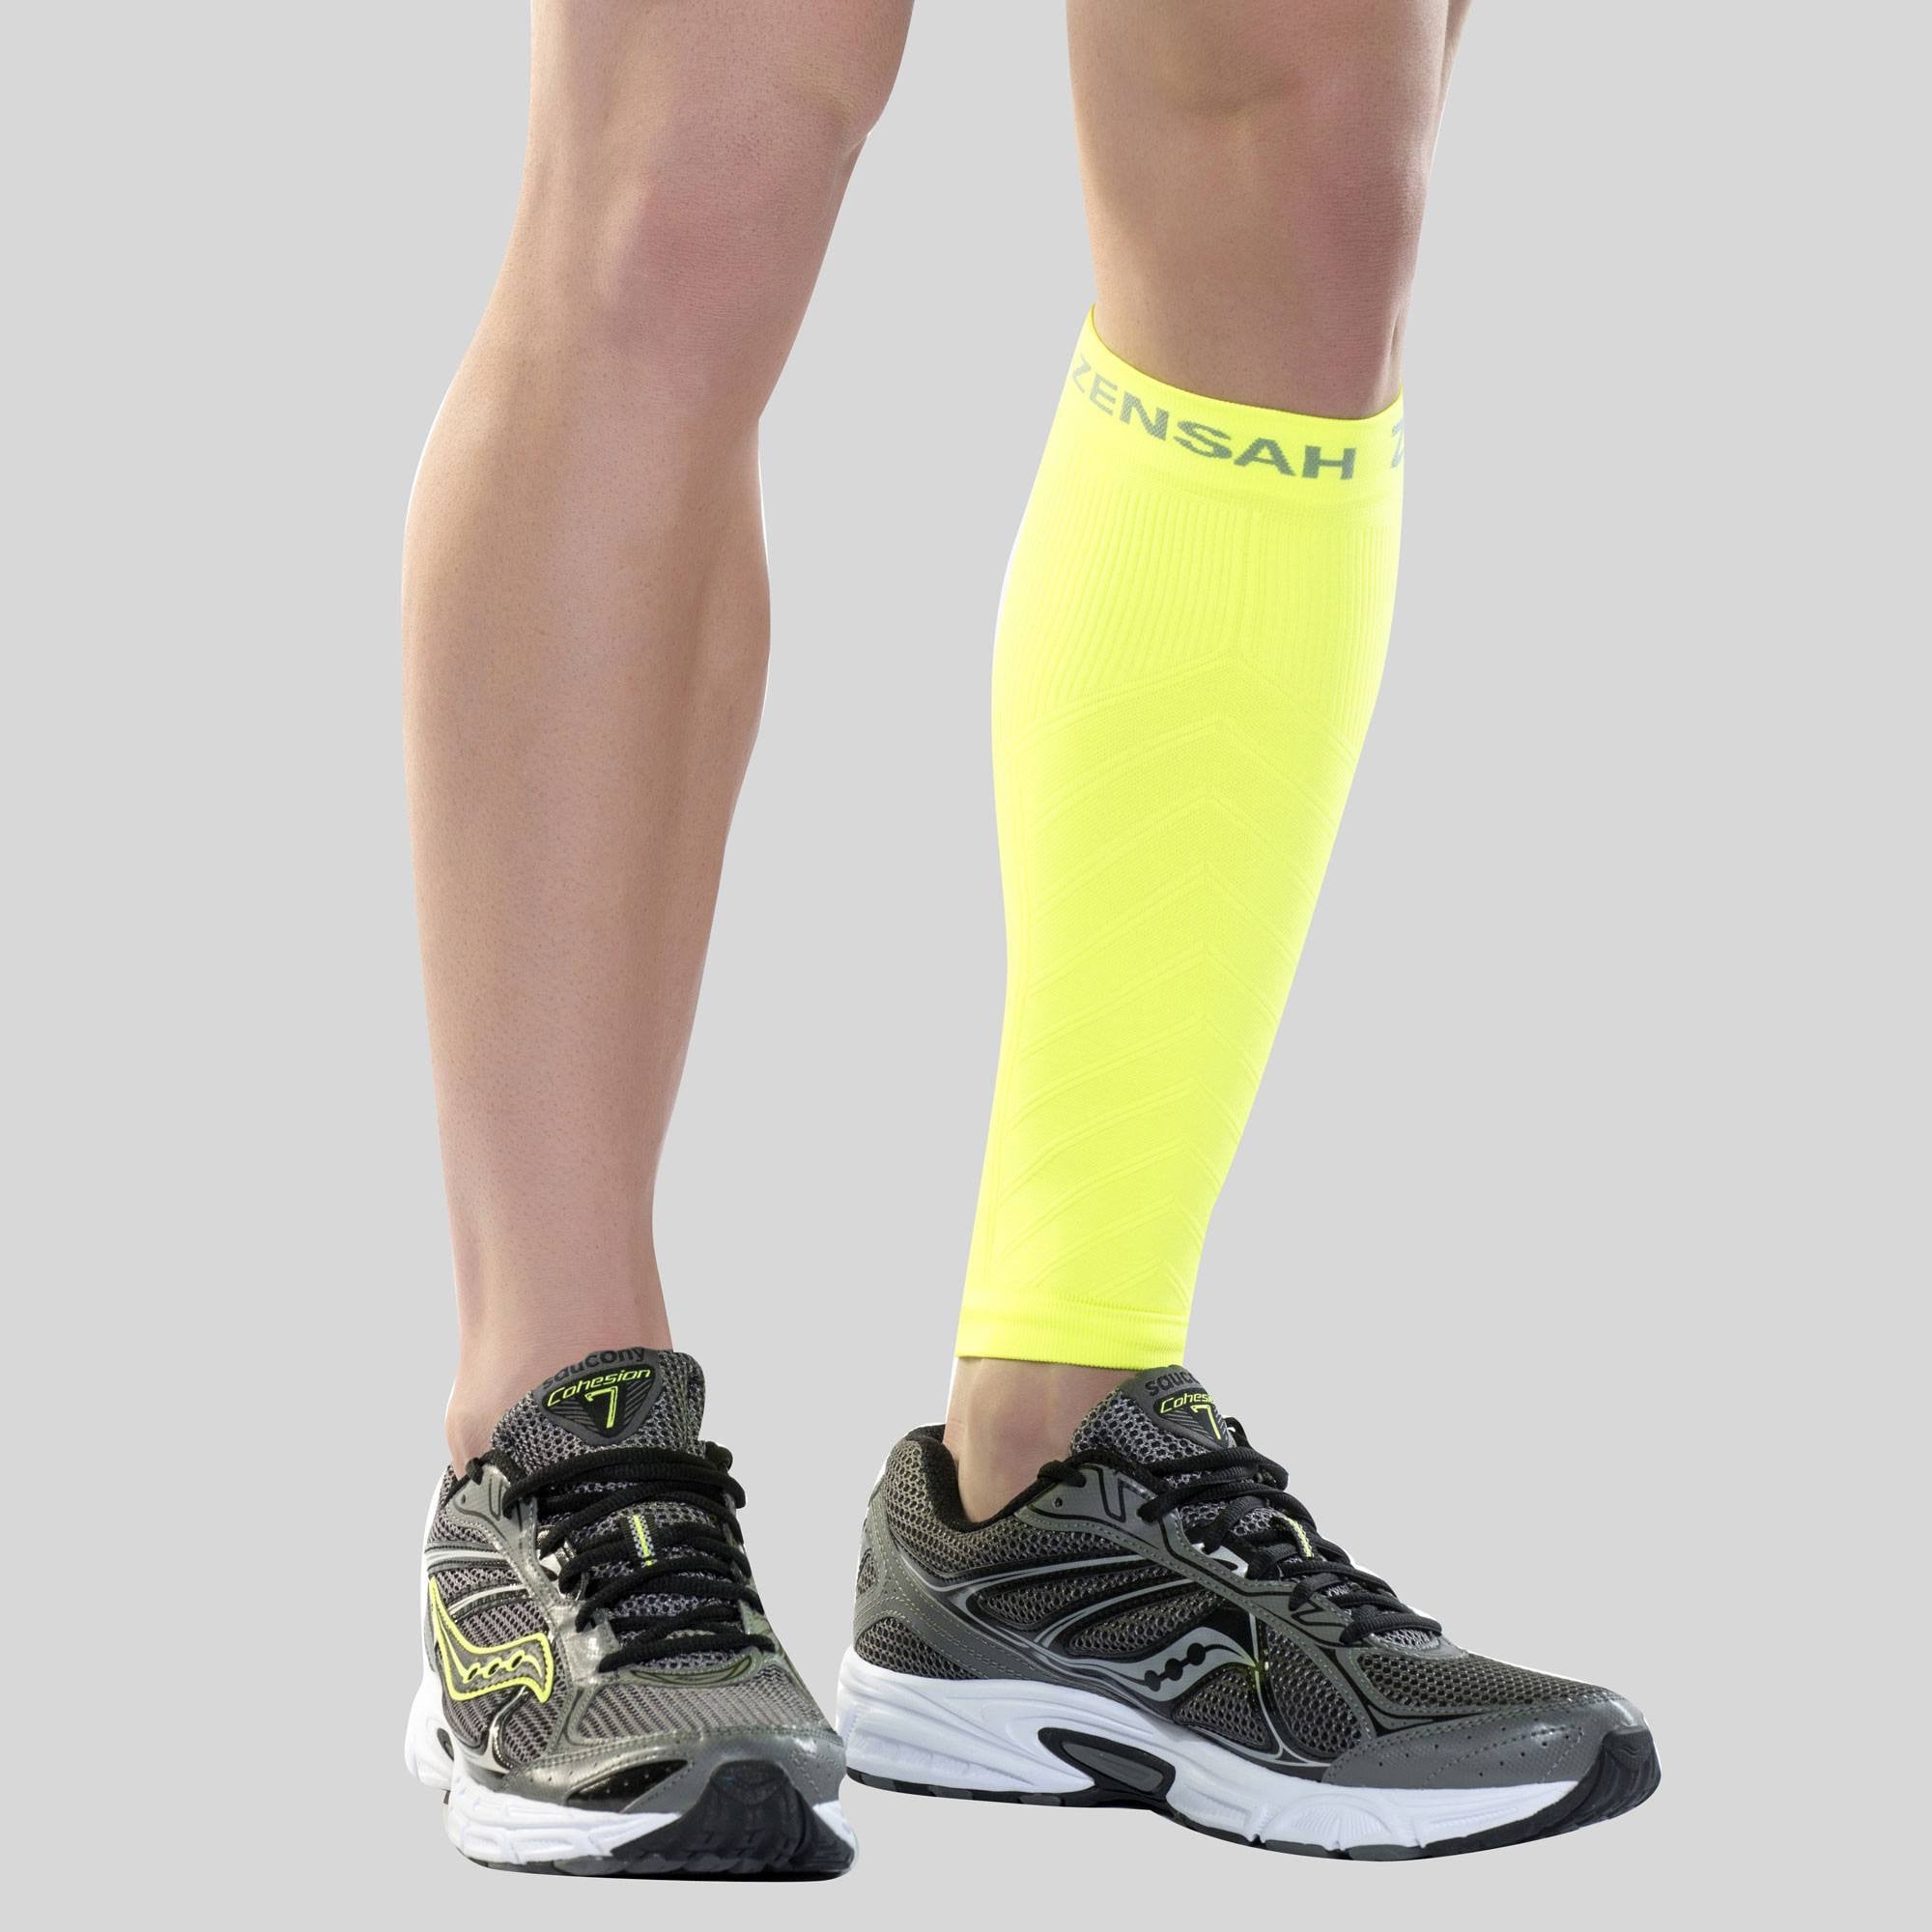 Zensah Ultra Compression Leg Sleeves for Running, Shin Splint Relief,  White,Small : Buy Online at Best Price in KSA - Souq is now :  Health